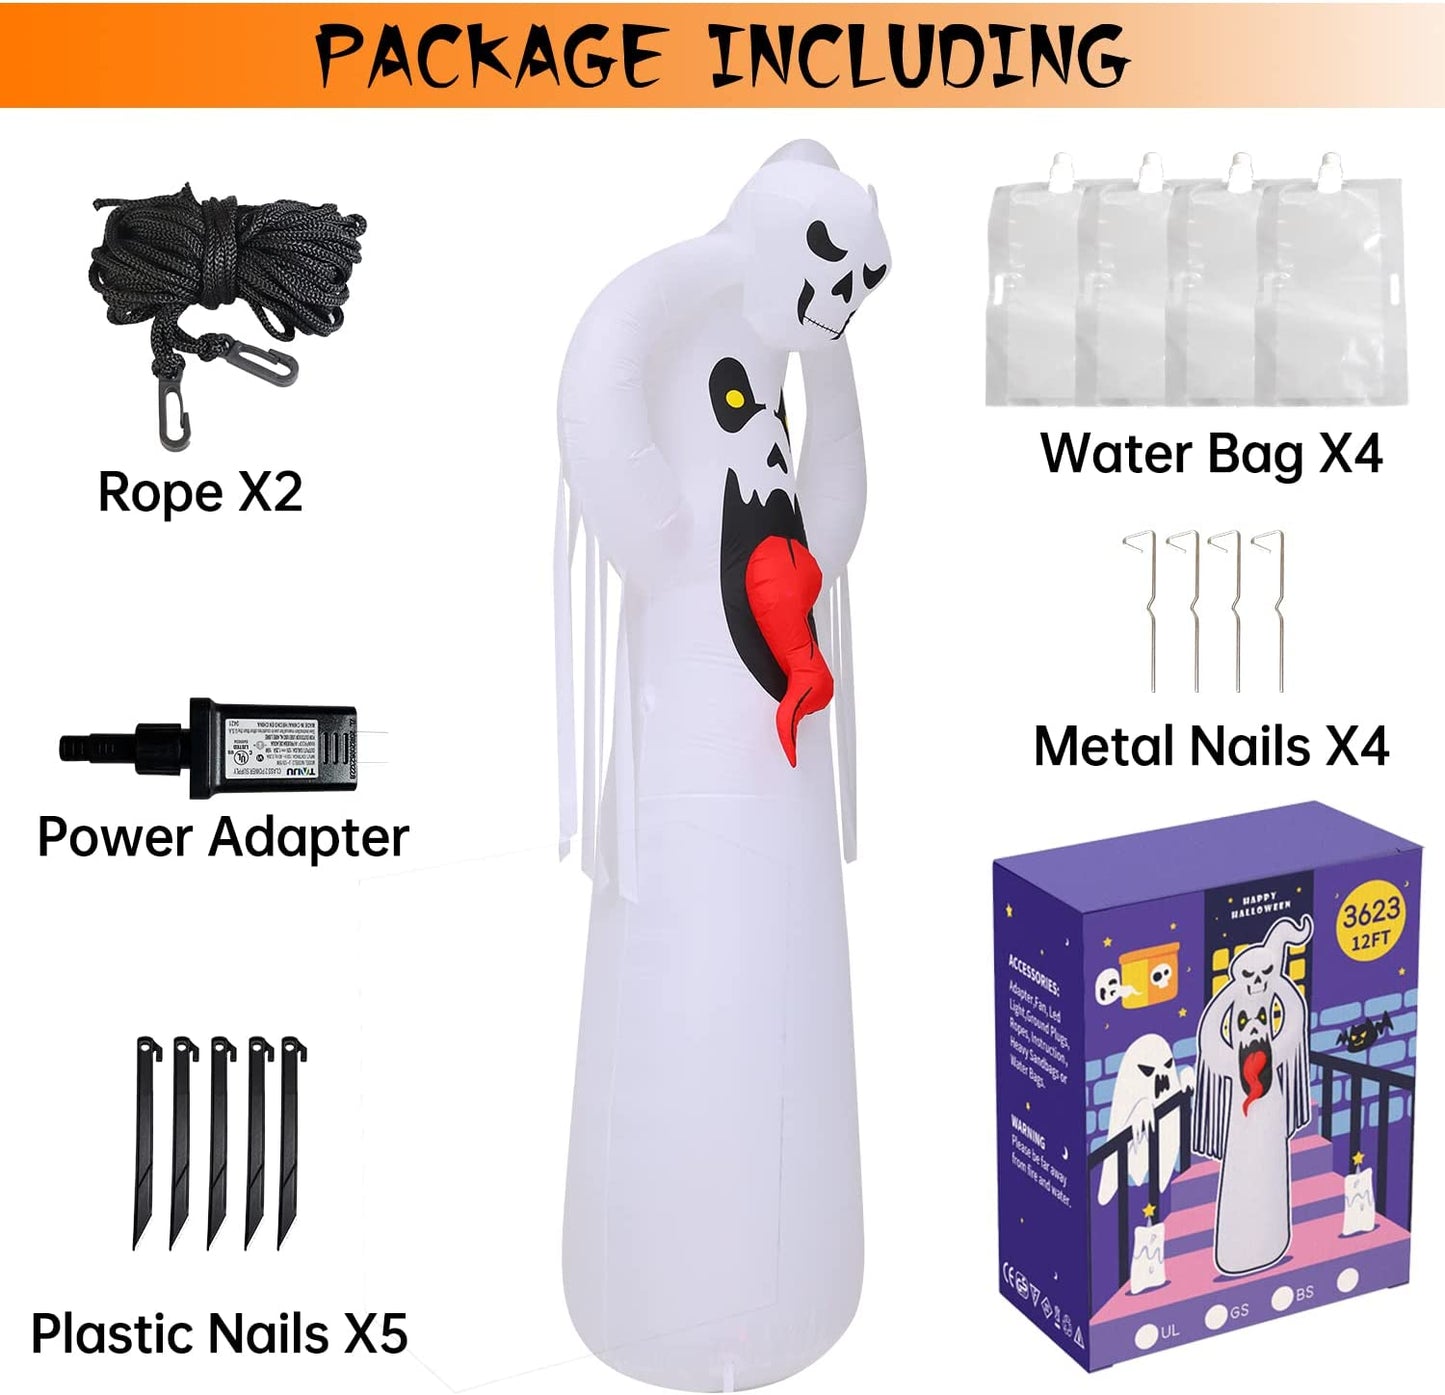 12 FT Halloween Inflatable Decorations Giant Terrible Spooky Ghost, Outdoor Holiday Decor Blow up Halloween Yard Decor, LED Lights Inflatables Outdoor Garden Lawn Halloween Decoration